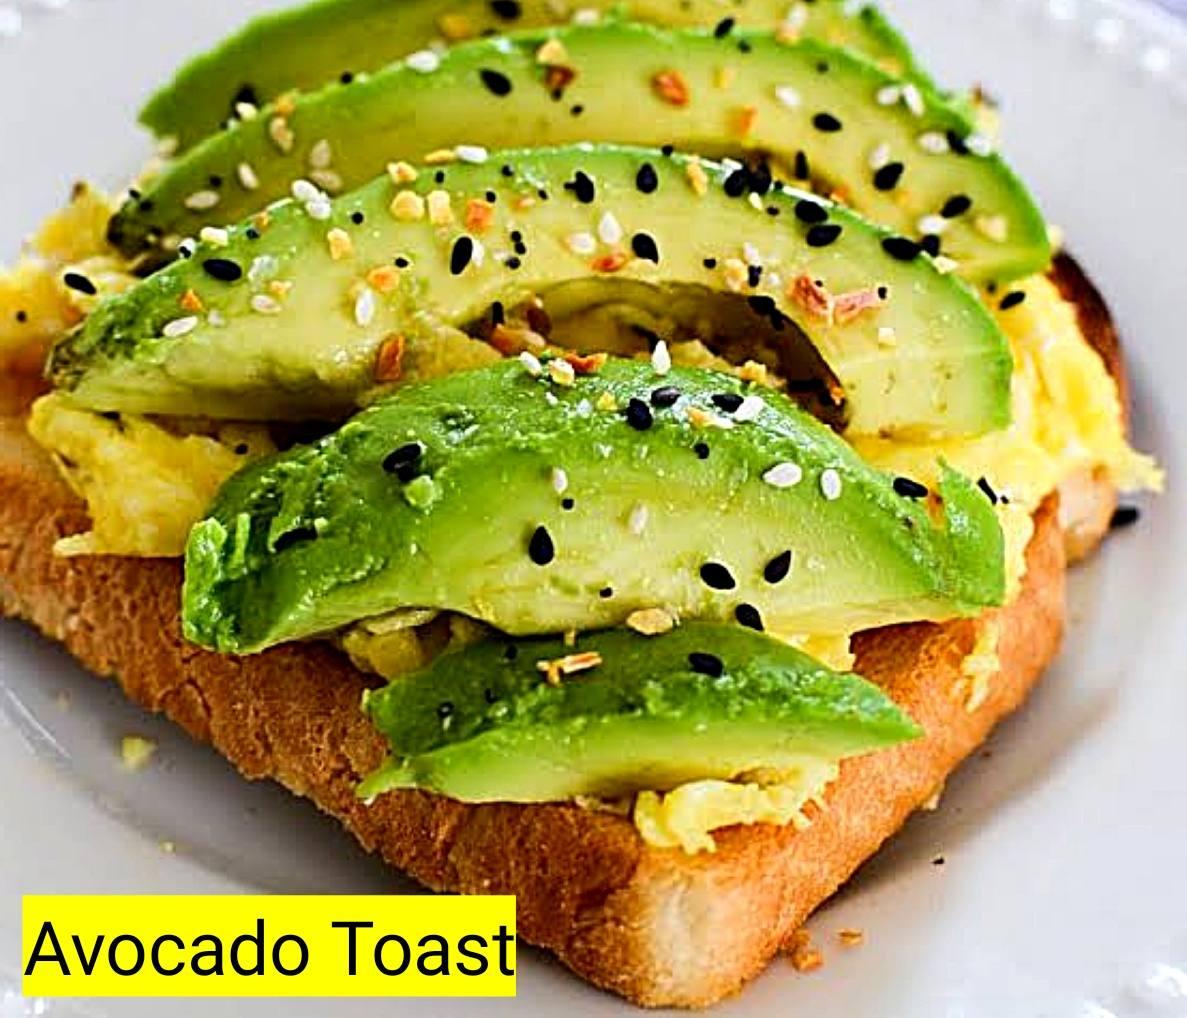 Avocado Toast is What To Eat For Lunch At Home